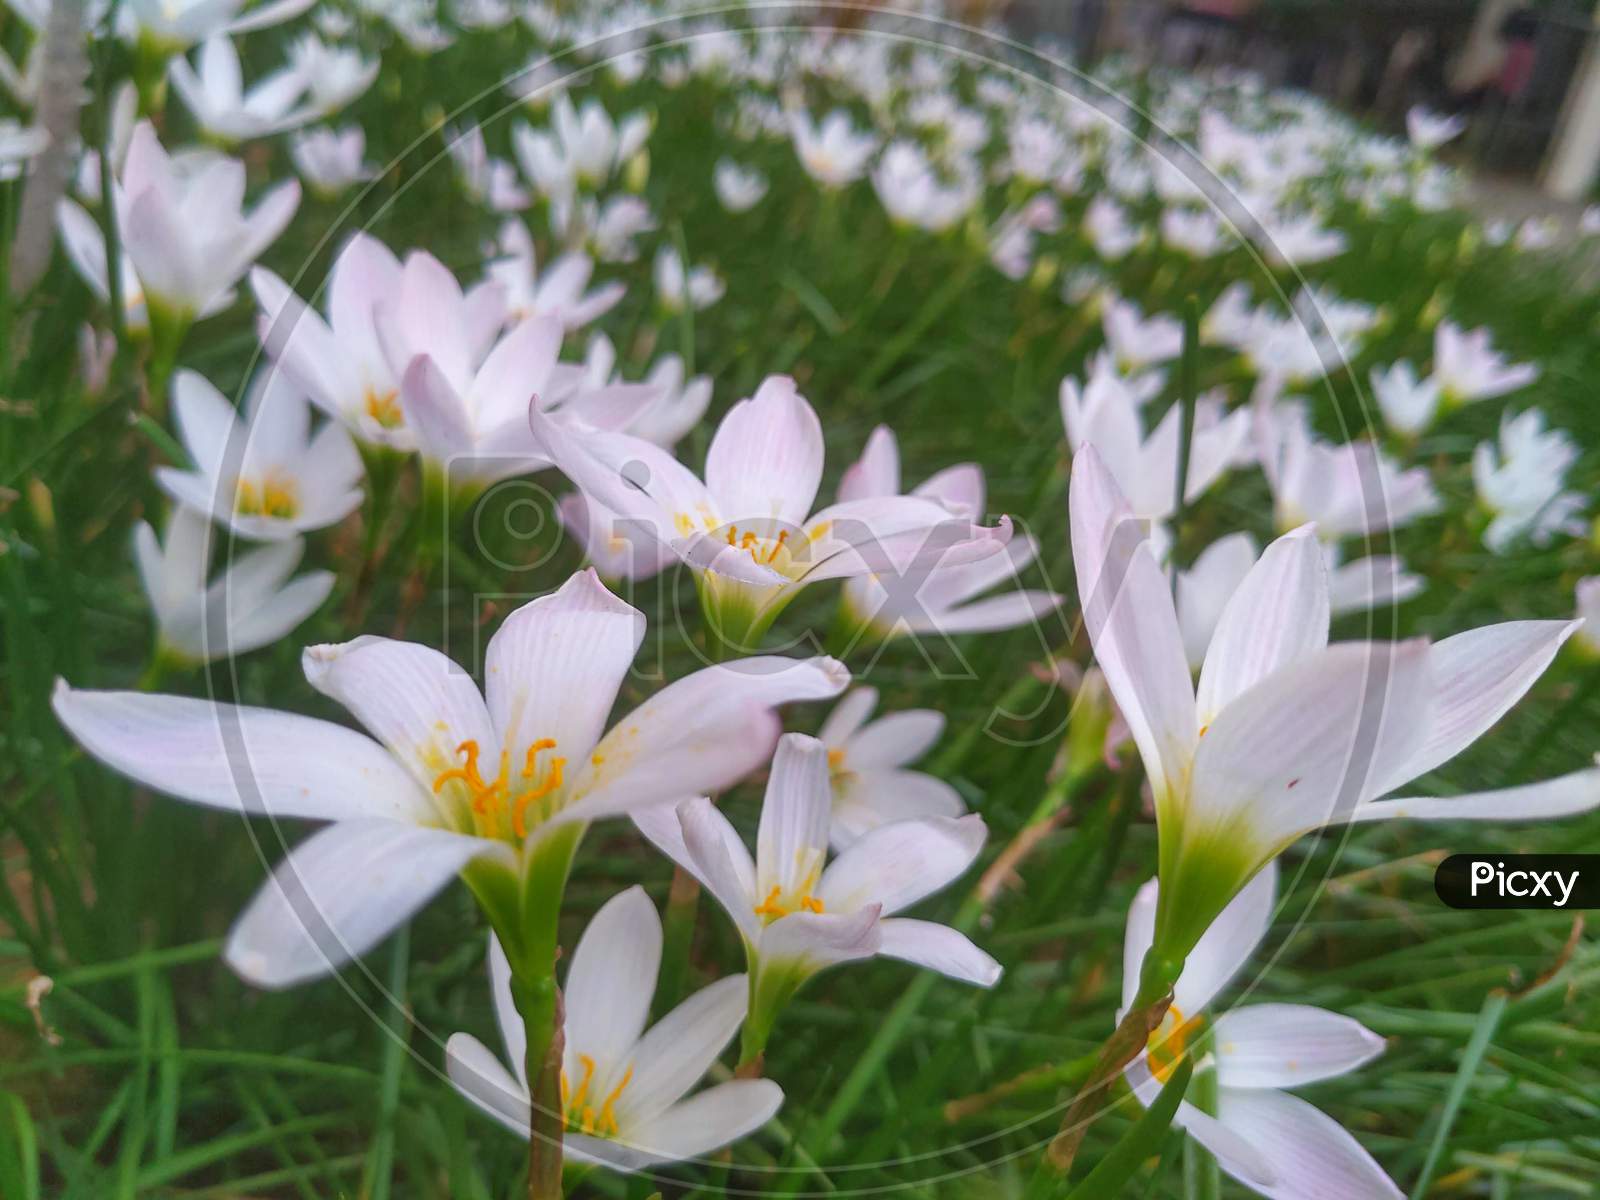 A bunch of white rain lily ,autumn zephyrlily ,fairy lily . scientific name is Zephyranthes candida.